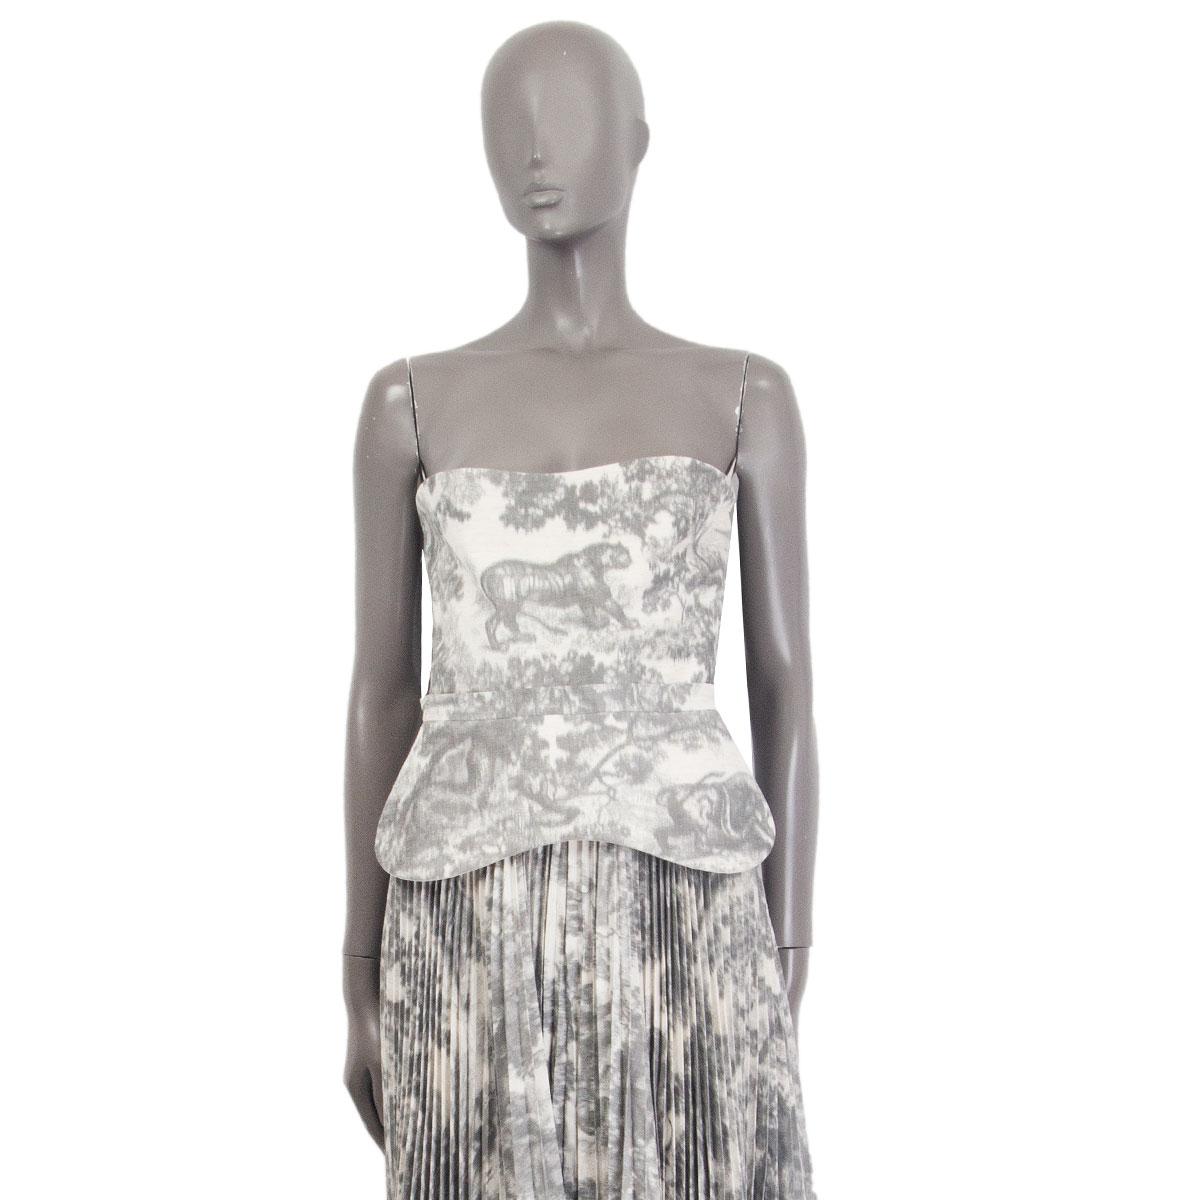 100% authentic Christian Dior Cruise 2019 Toile de Jouy backless dress in light grey and off-white cotton (missing tag). Pleated midi skirt part. Closes with a zipper and two buckles on the back. Has been worn and is in excellent condition. 

Tag